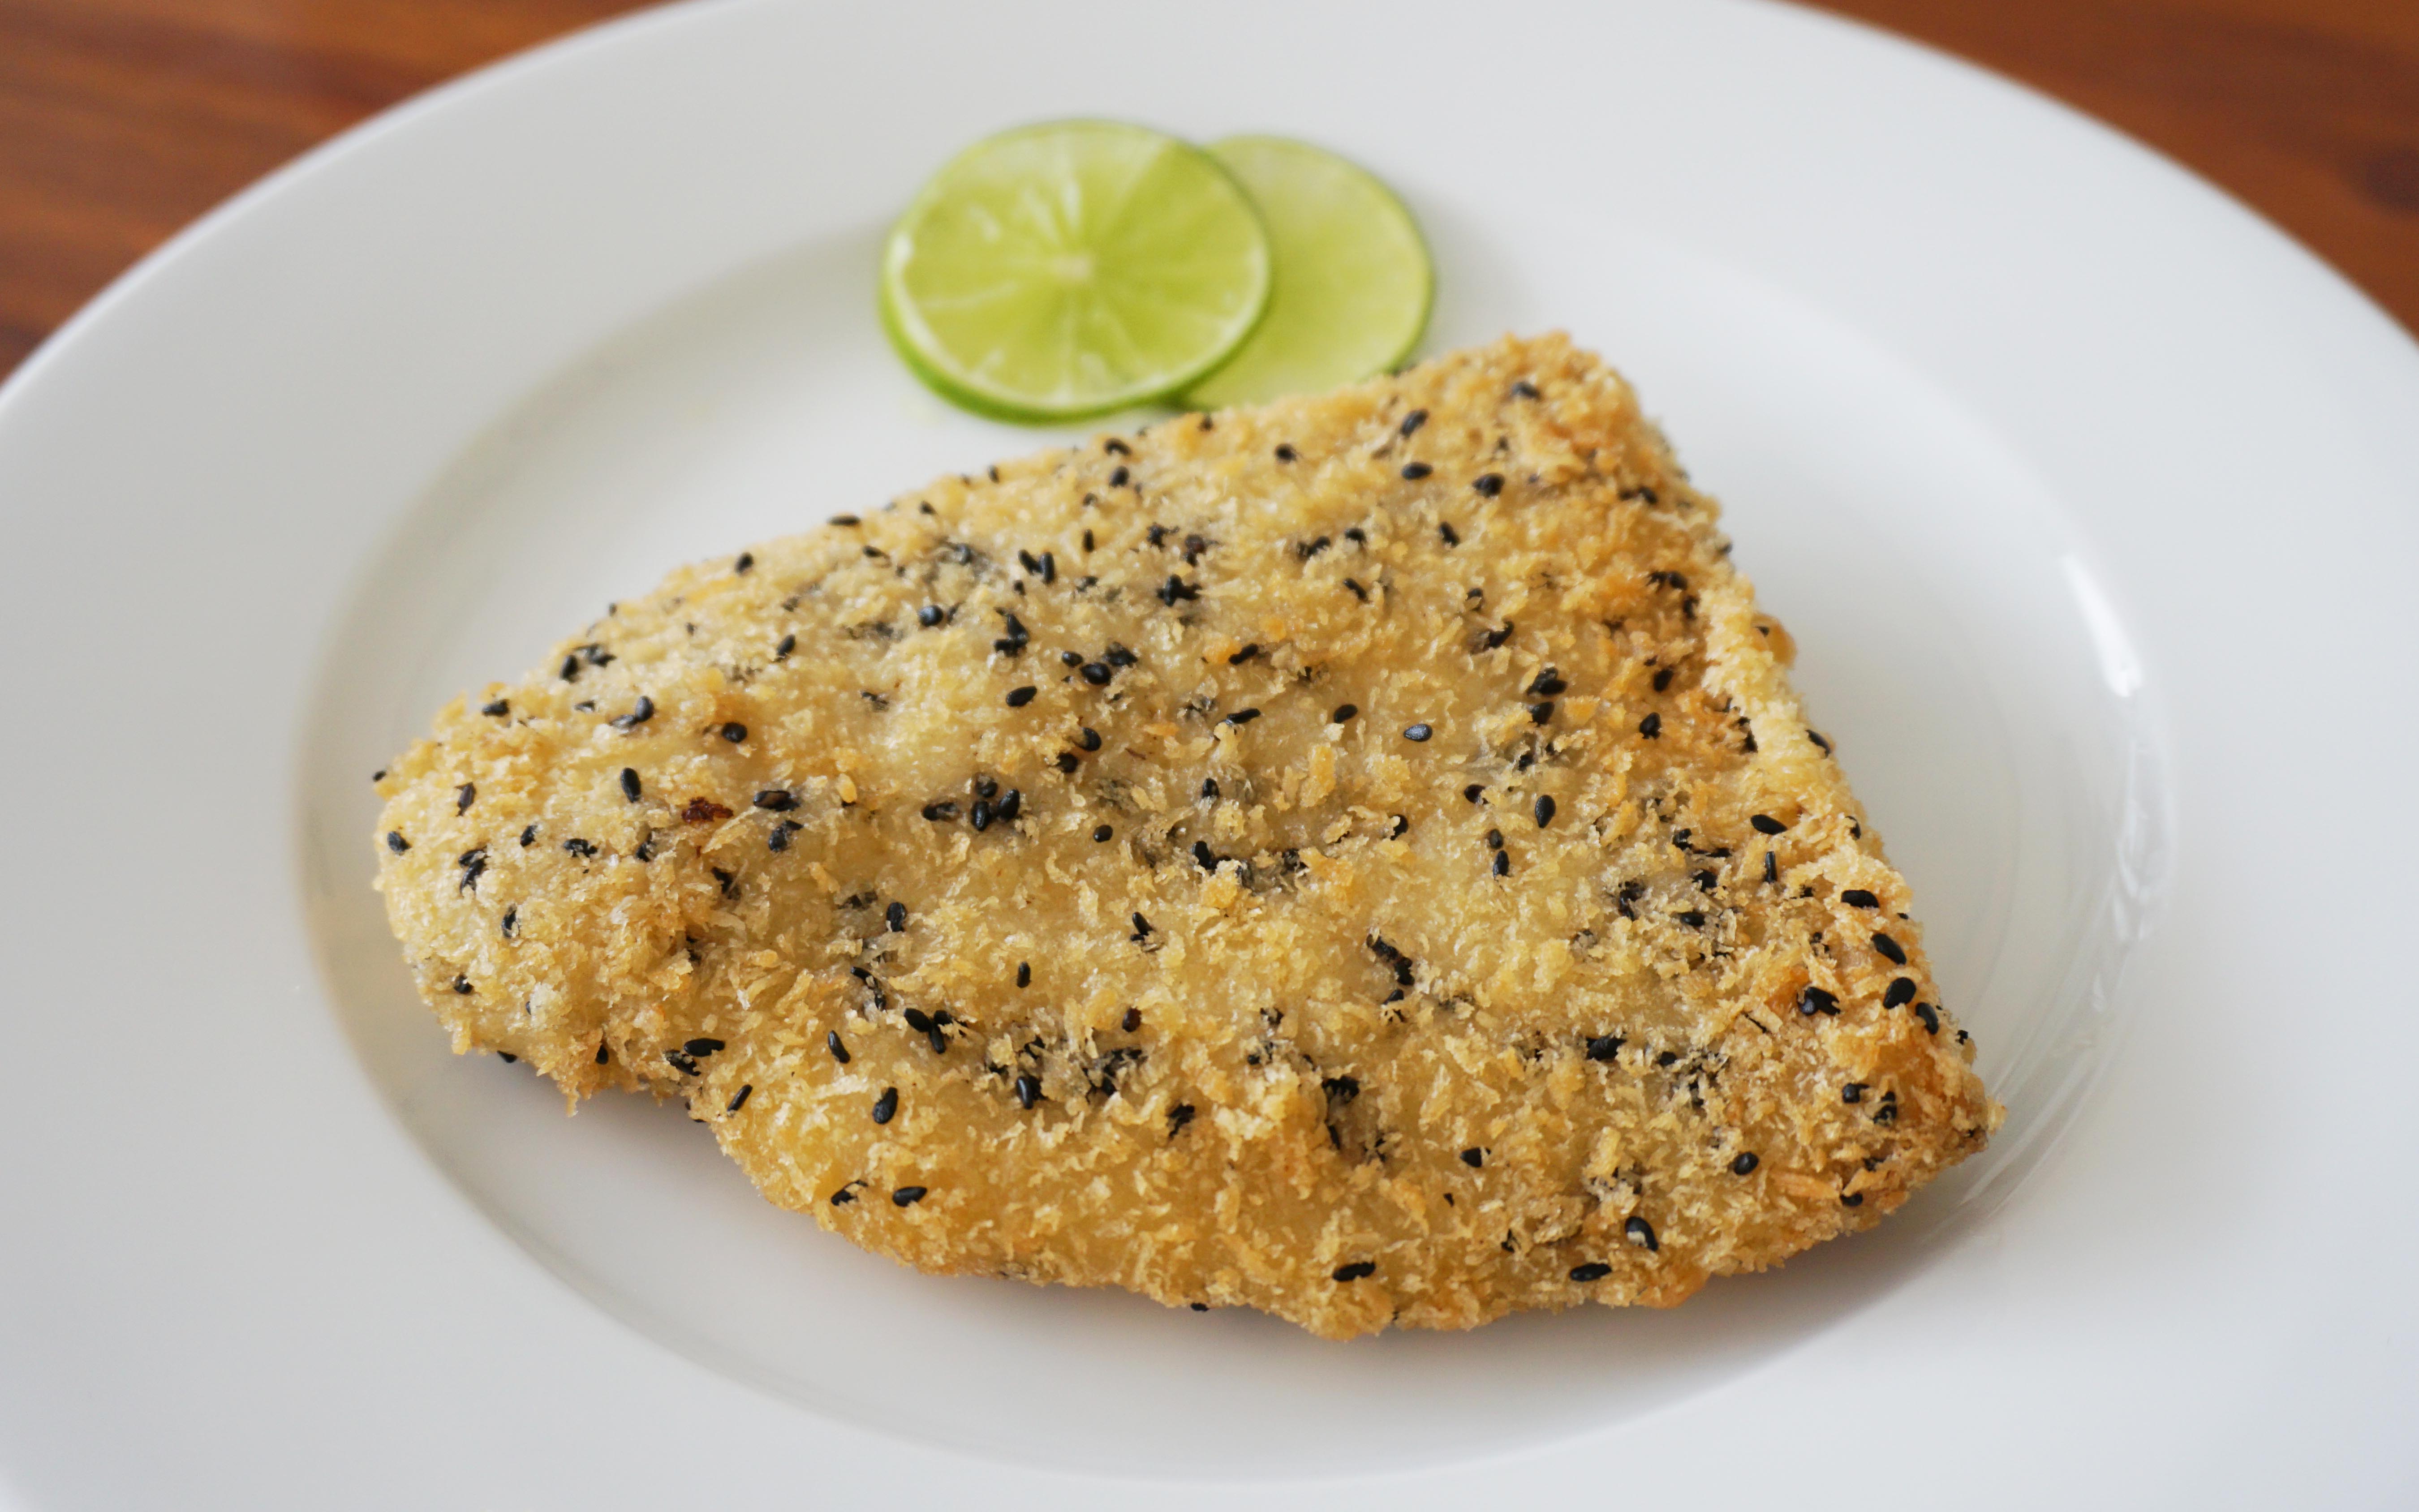 Crusted fish portion